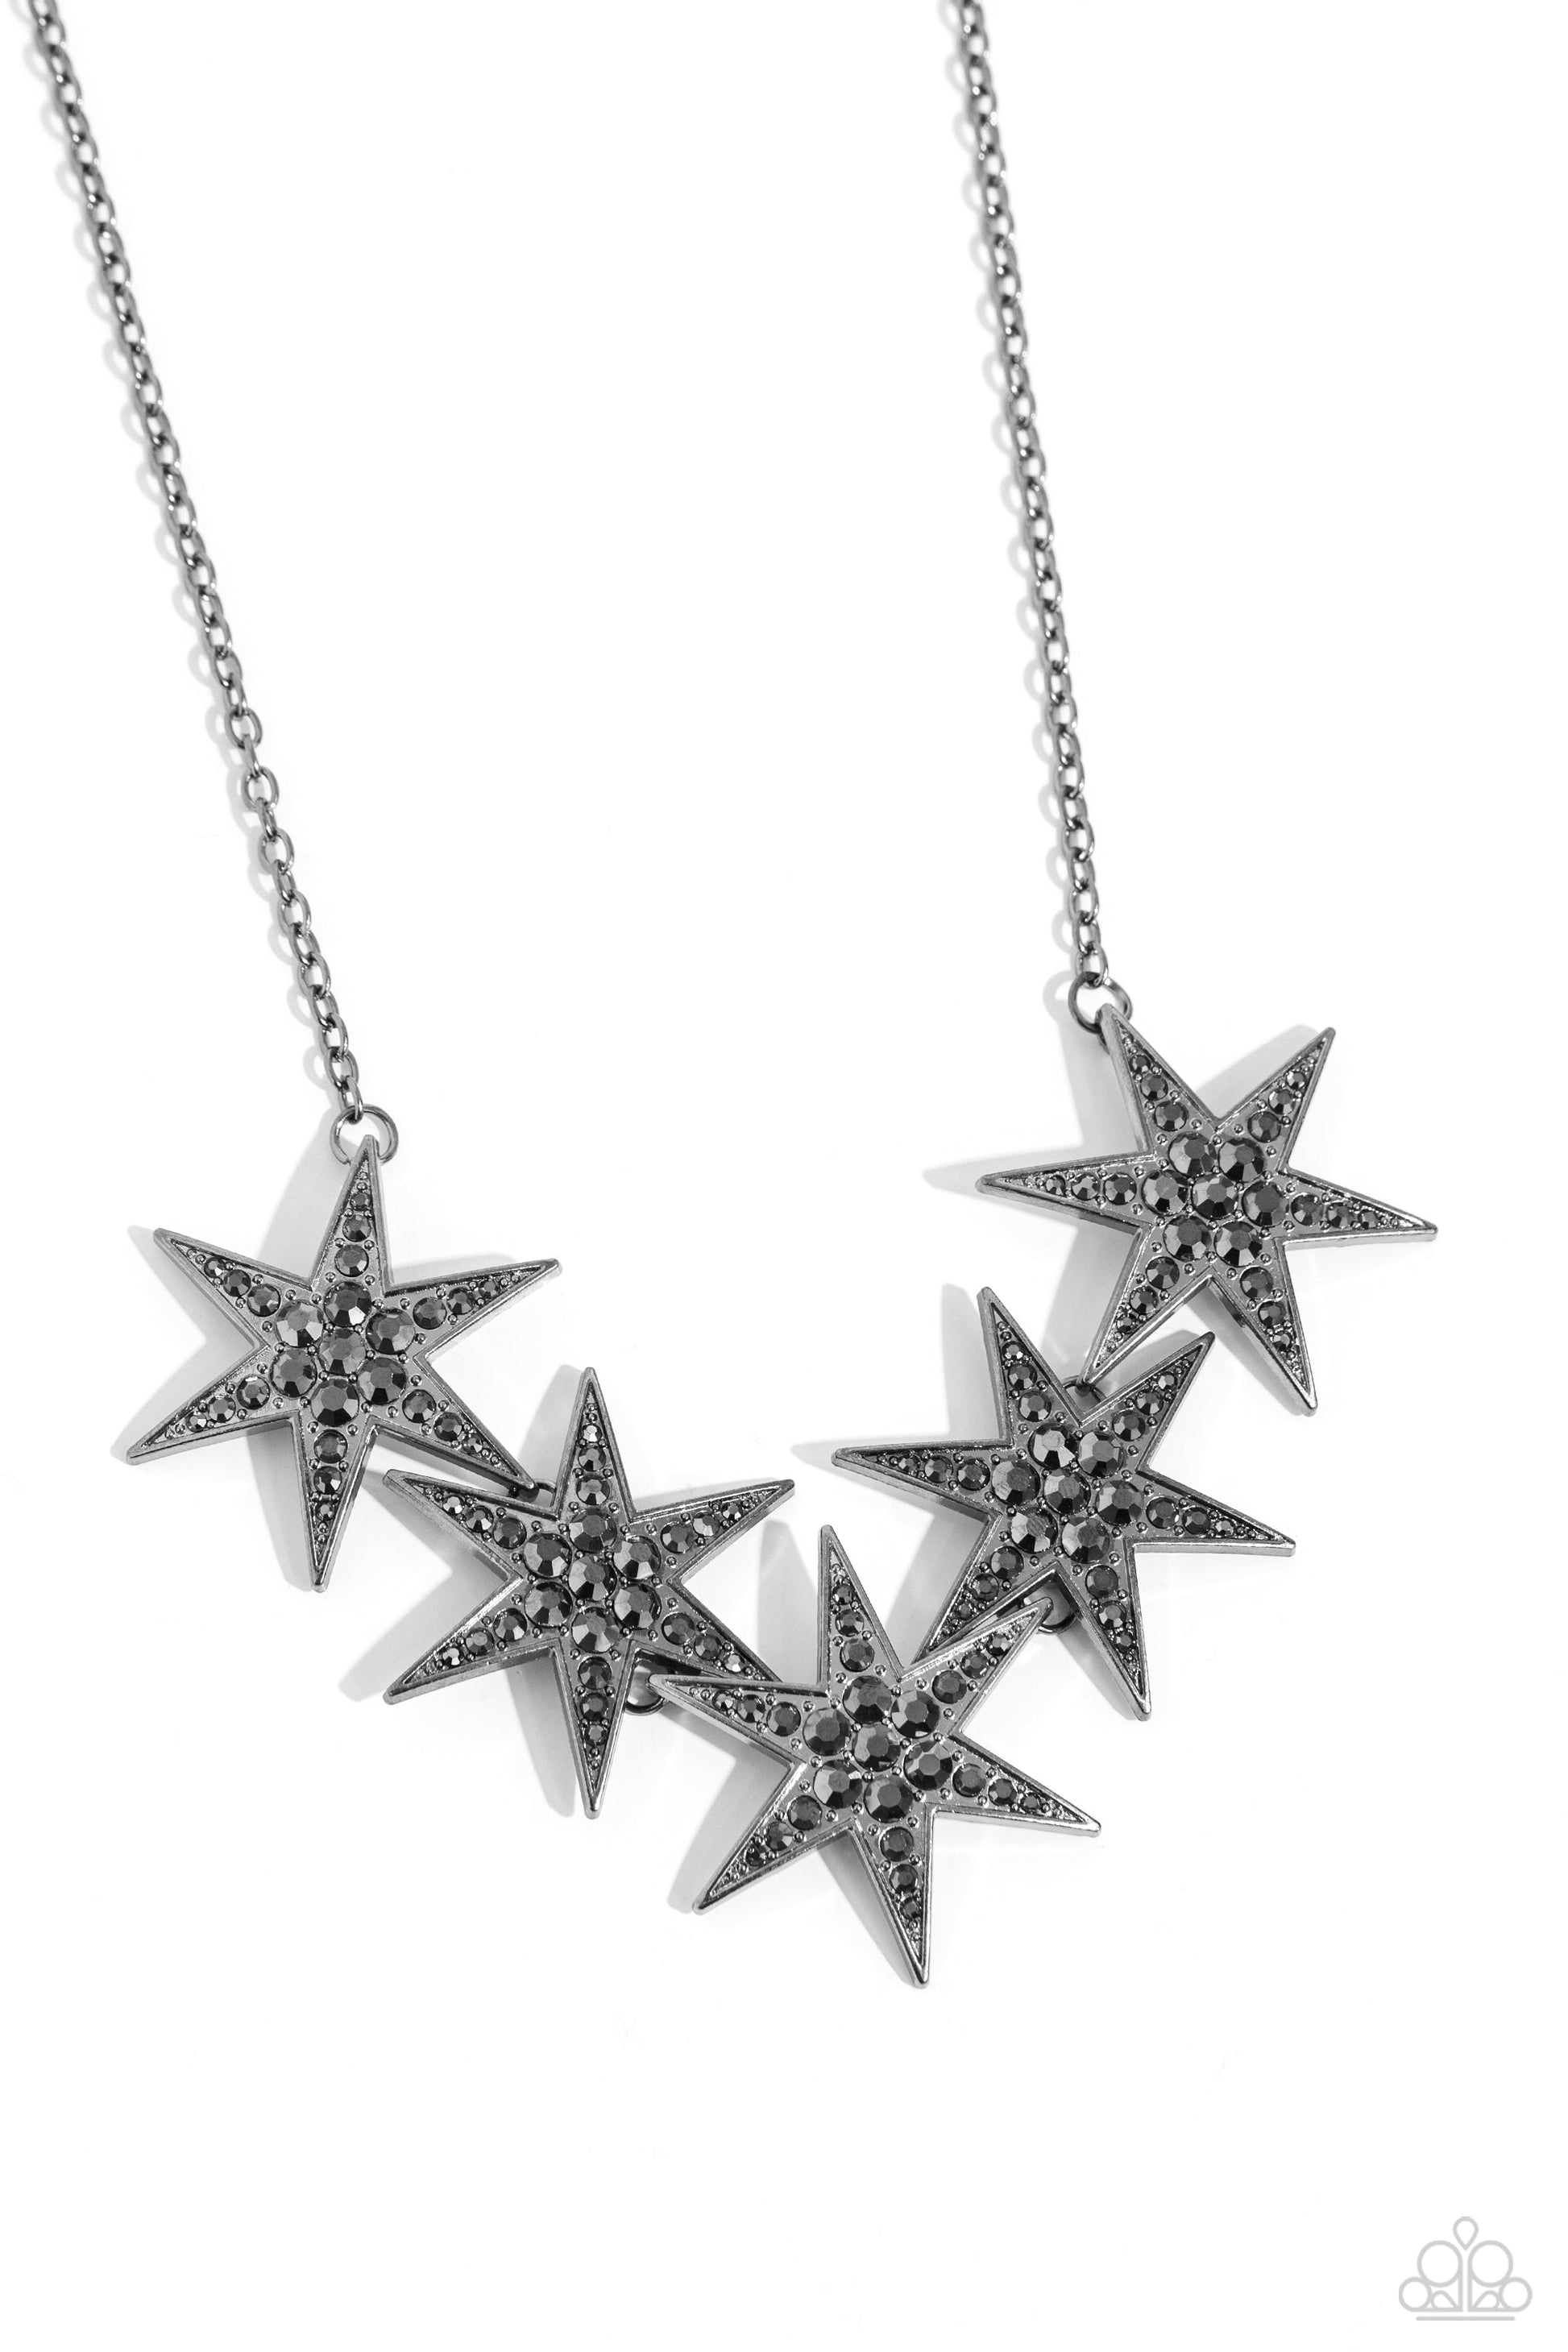 Rockstar Ready - Black Gunmetal Star Necklace - Paparazzi Accessories - Dotted with various sizes of highly reflective hematite rhinestones, a stellar collection of 3D gunmetal stars interlock from a dainty gunmetal link chain for an out-of-this-world edgy fashion.